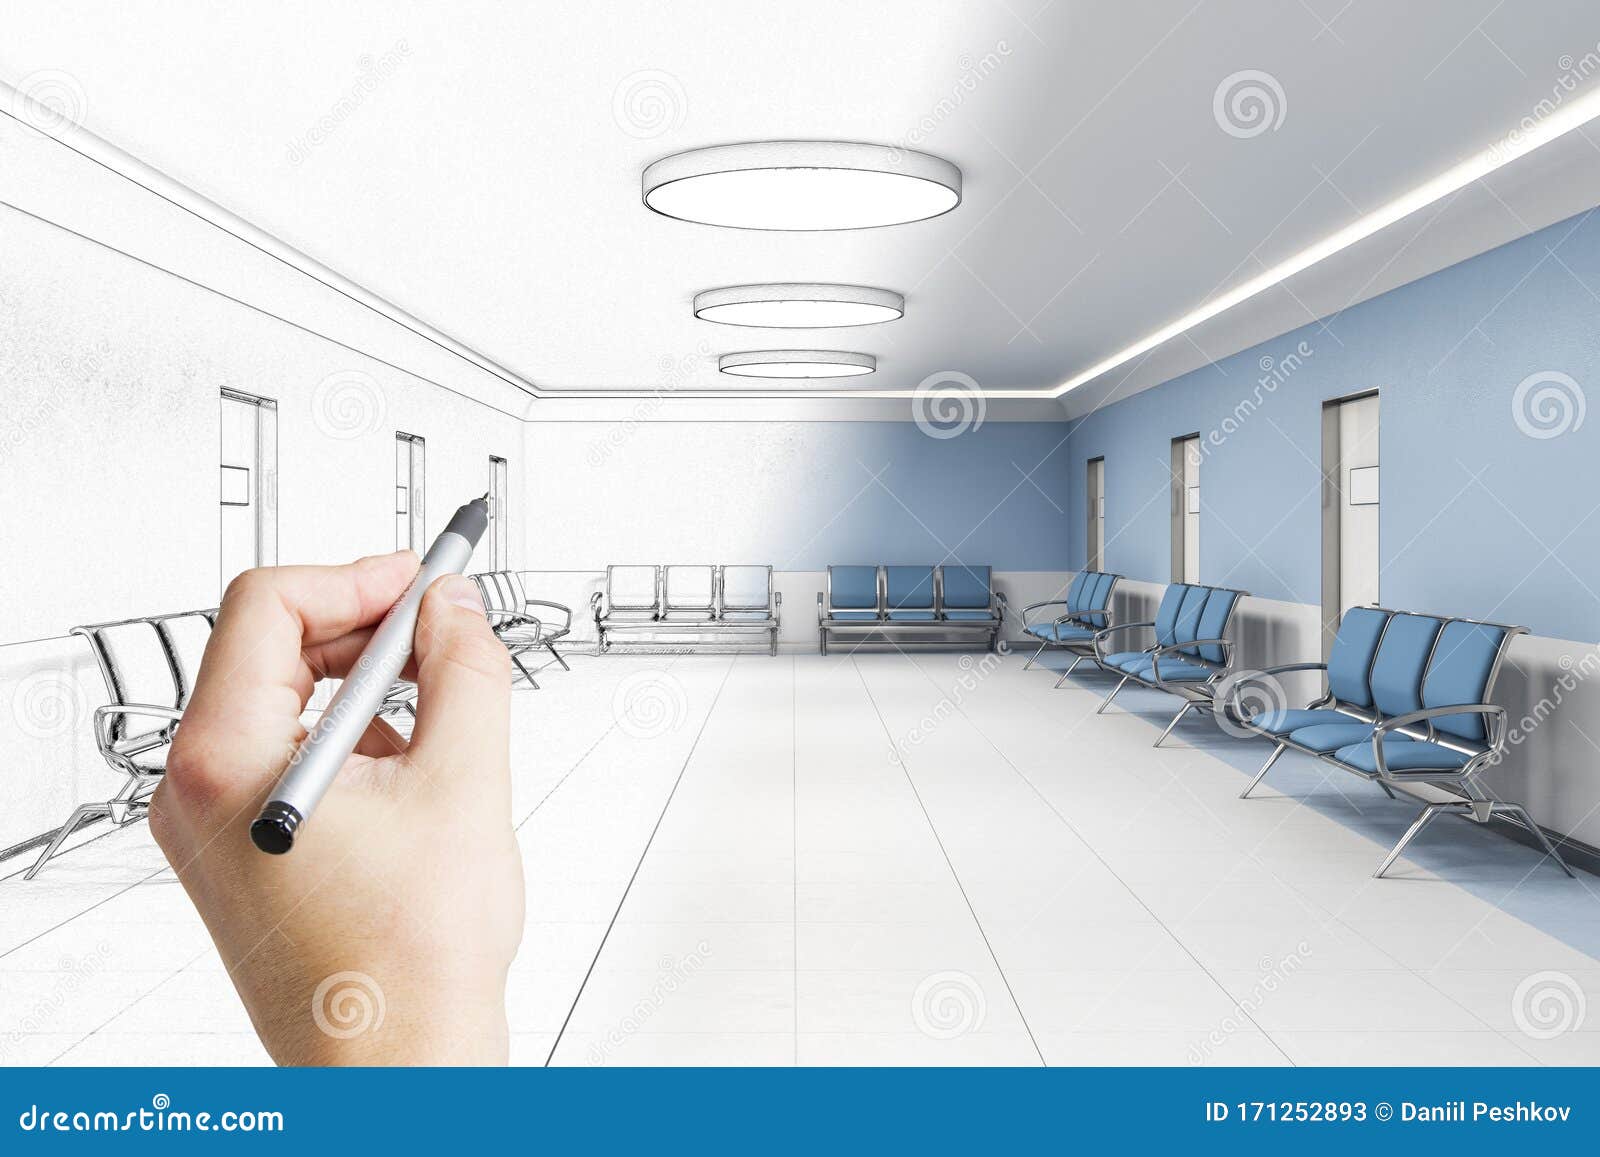 Hand Drawing Reception Desk Stock Image Image Of Emergency